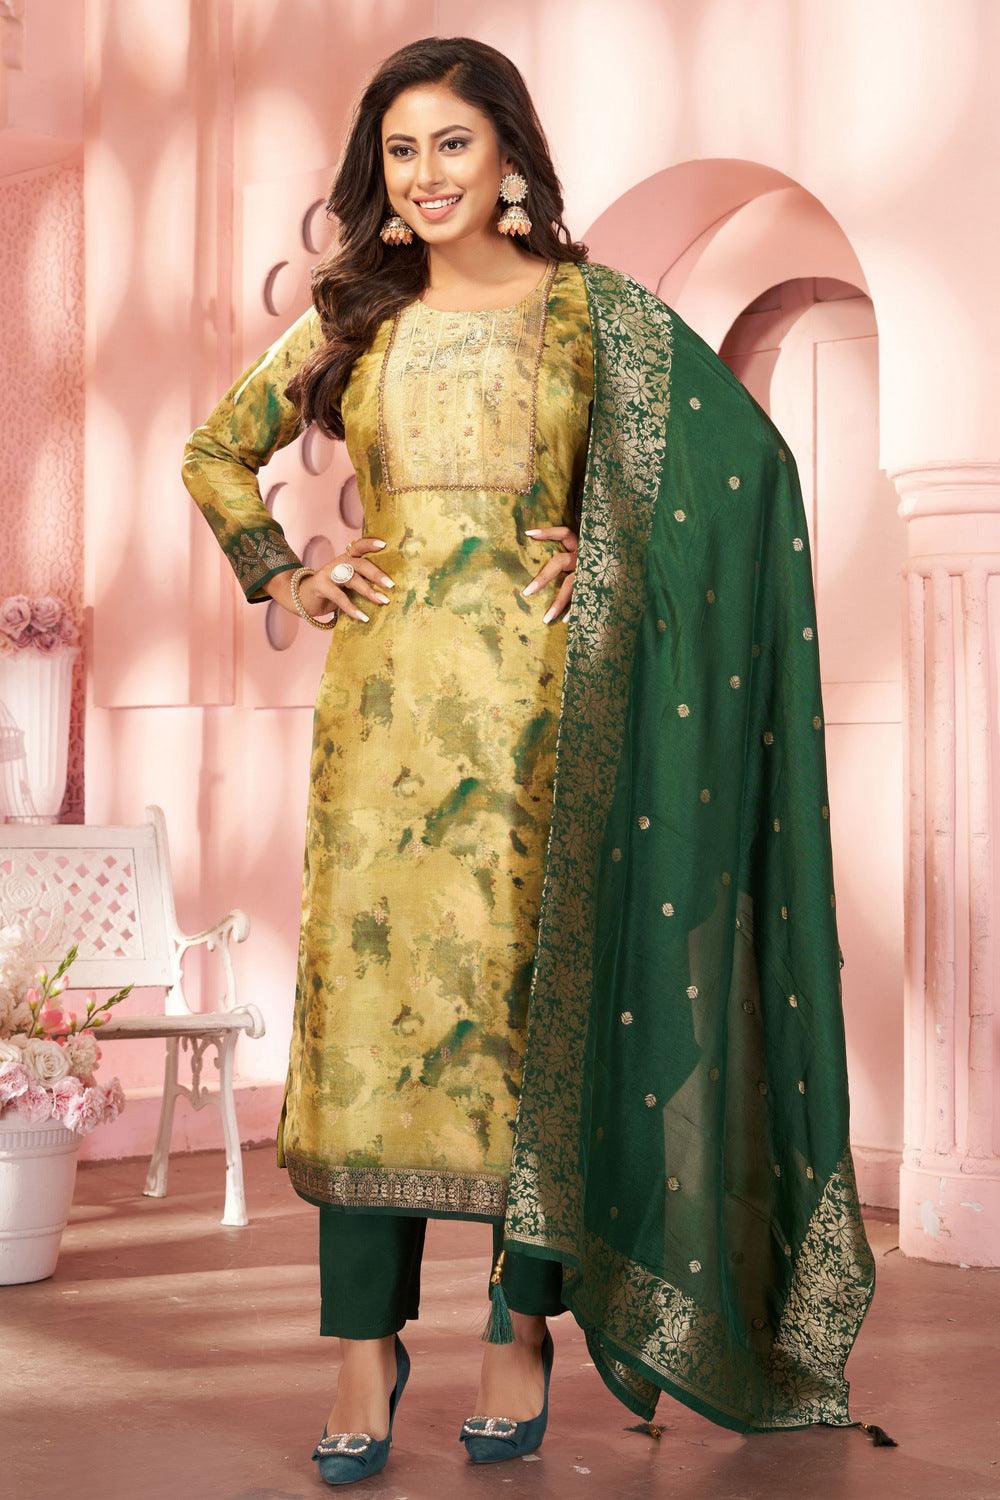 Lemon green sharara with resham embroidery and sequin work dupatta | Dress  indian style, Designer dresses indian, Fashion dresses